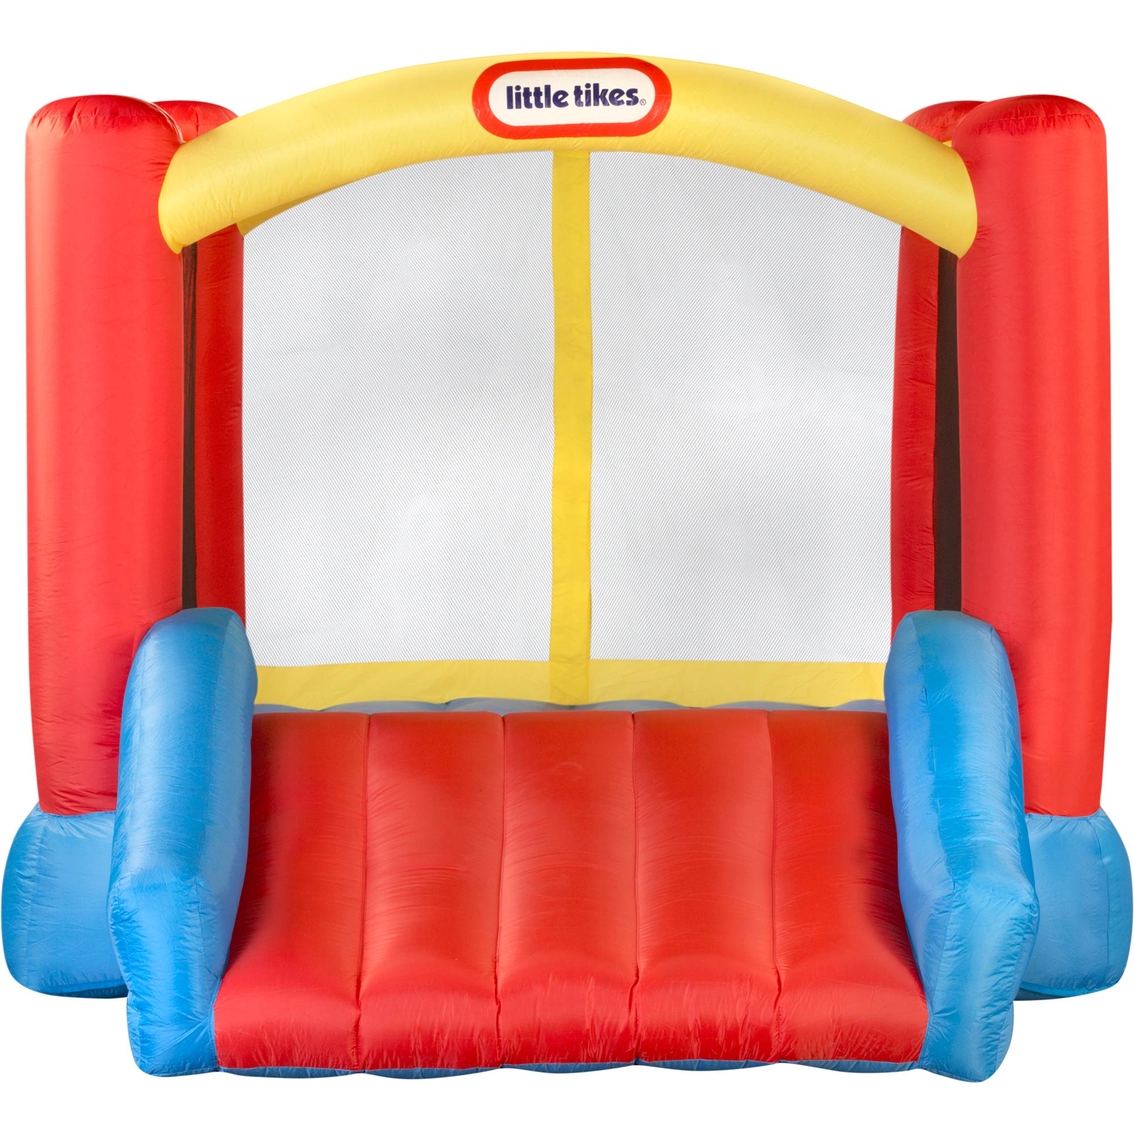 Little Tikes Shady Jump 'N Slide Bouncer - Image 2 of 5